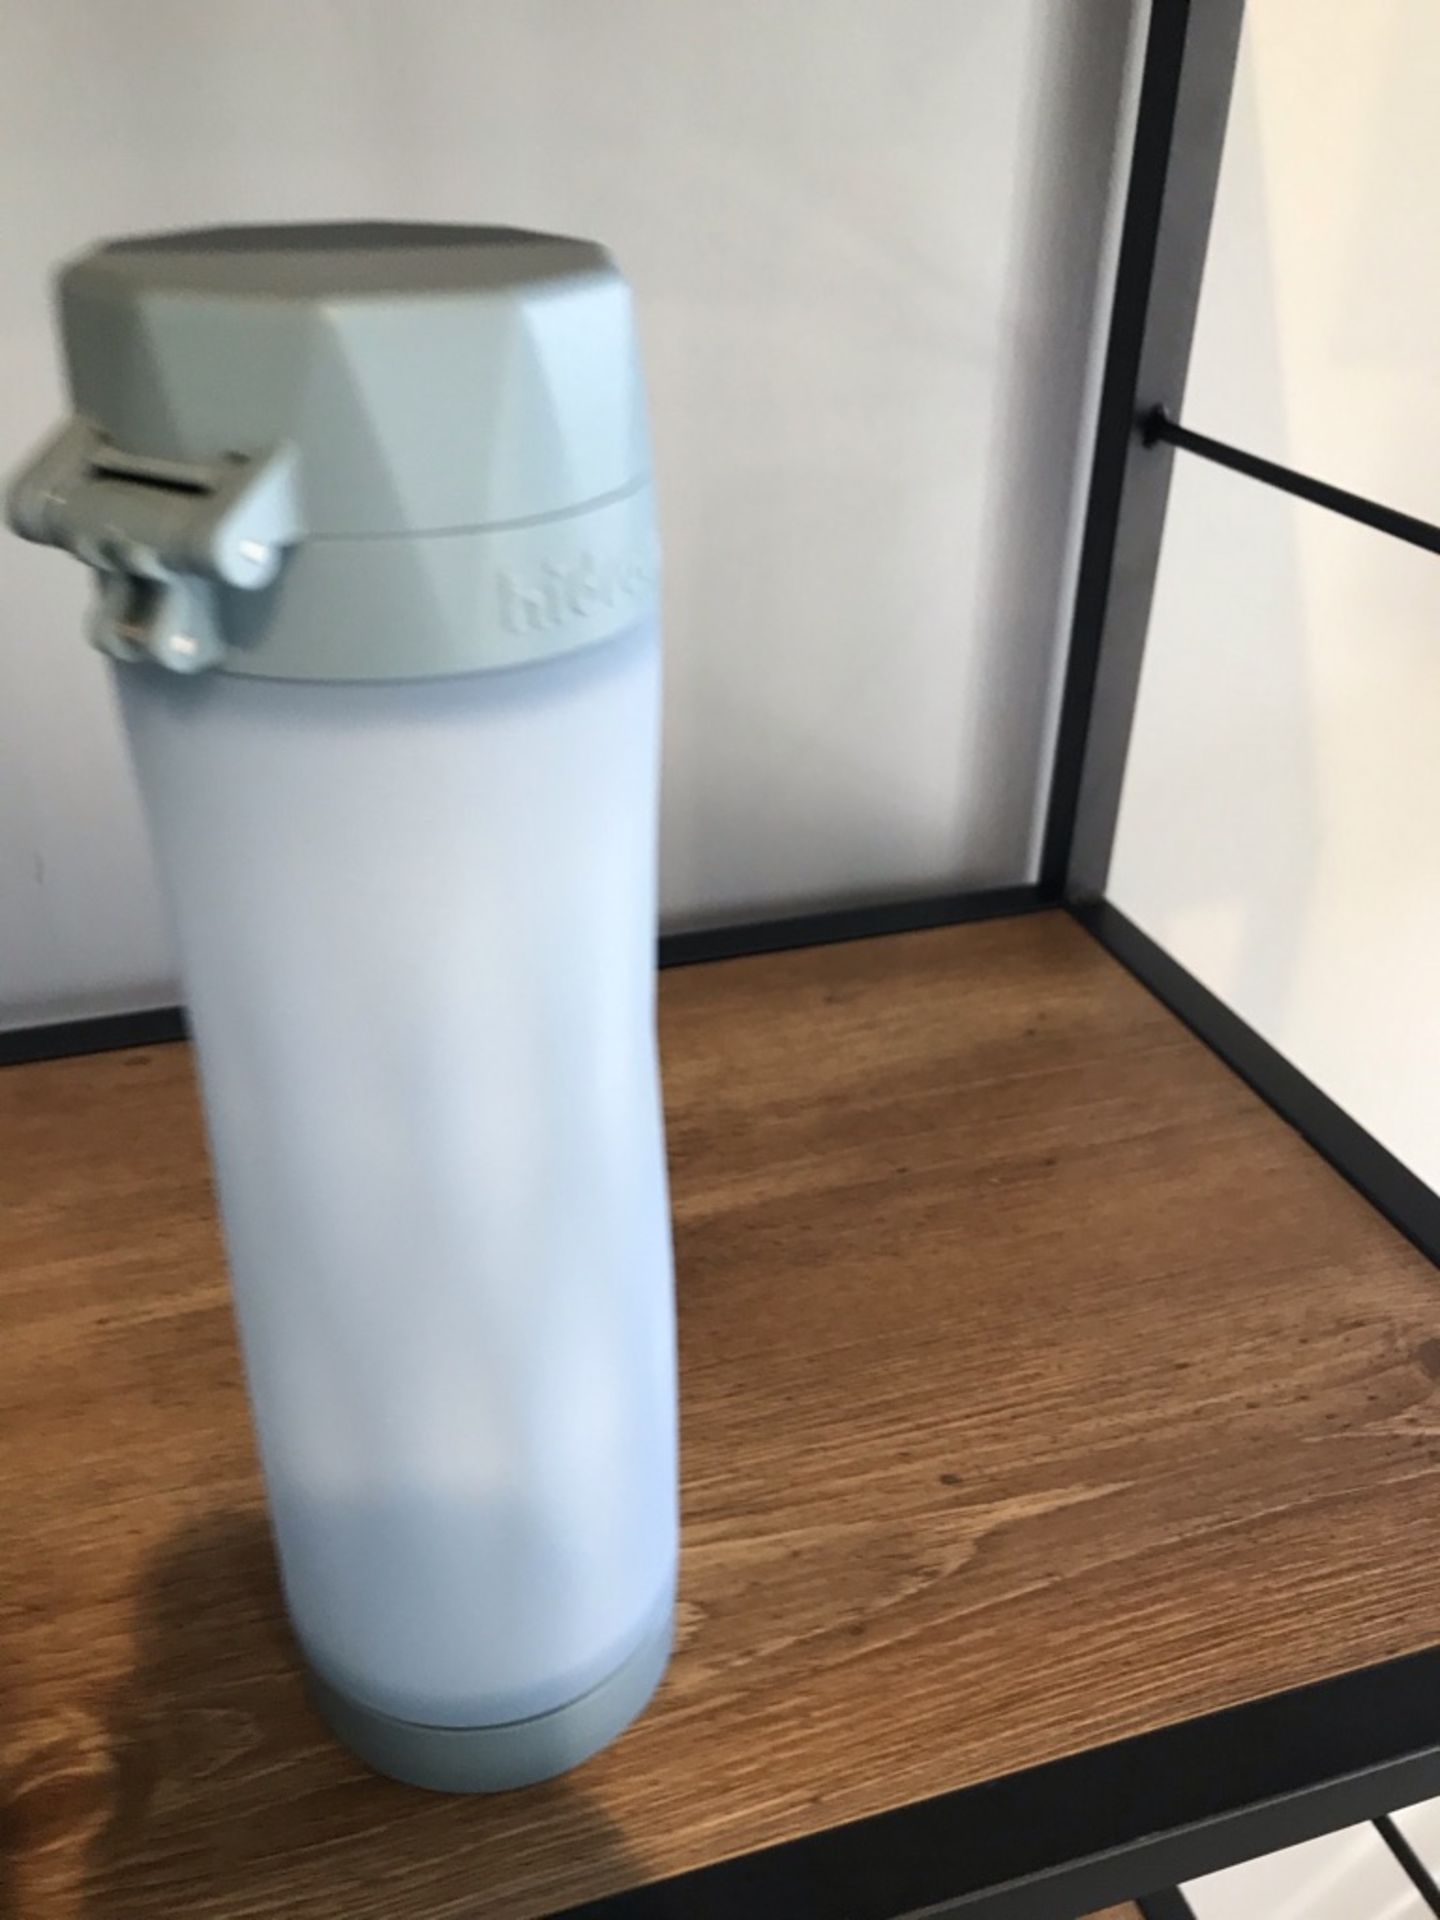 HIDRATE SPARK 3 SMART WATER BOTTLE, BLUETOOTH ENABLED (RETAIL PRICE $59.95) - Image 3 of 9